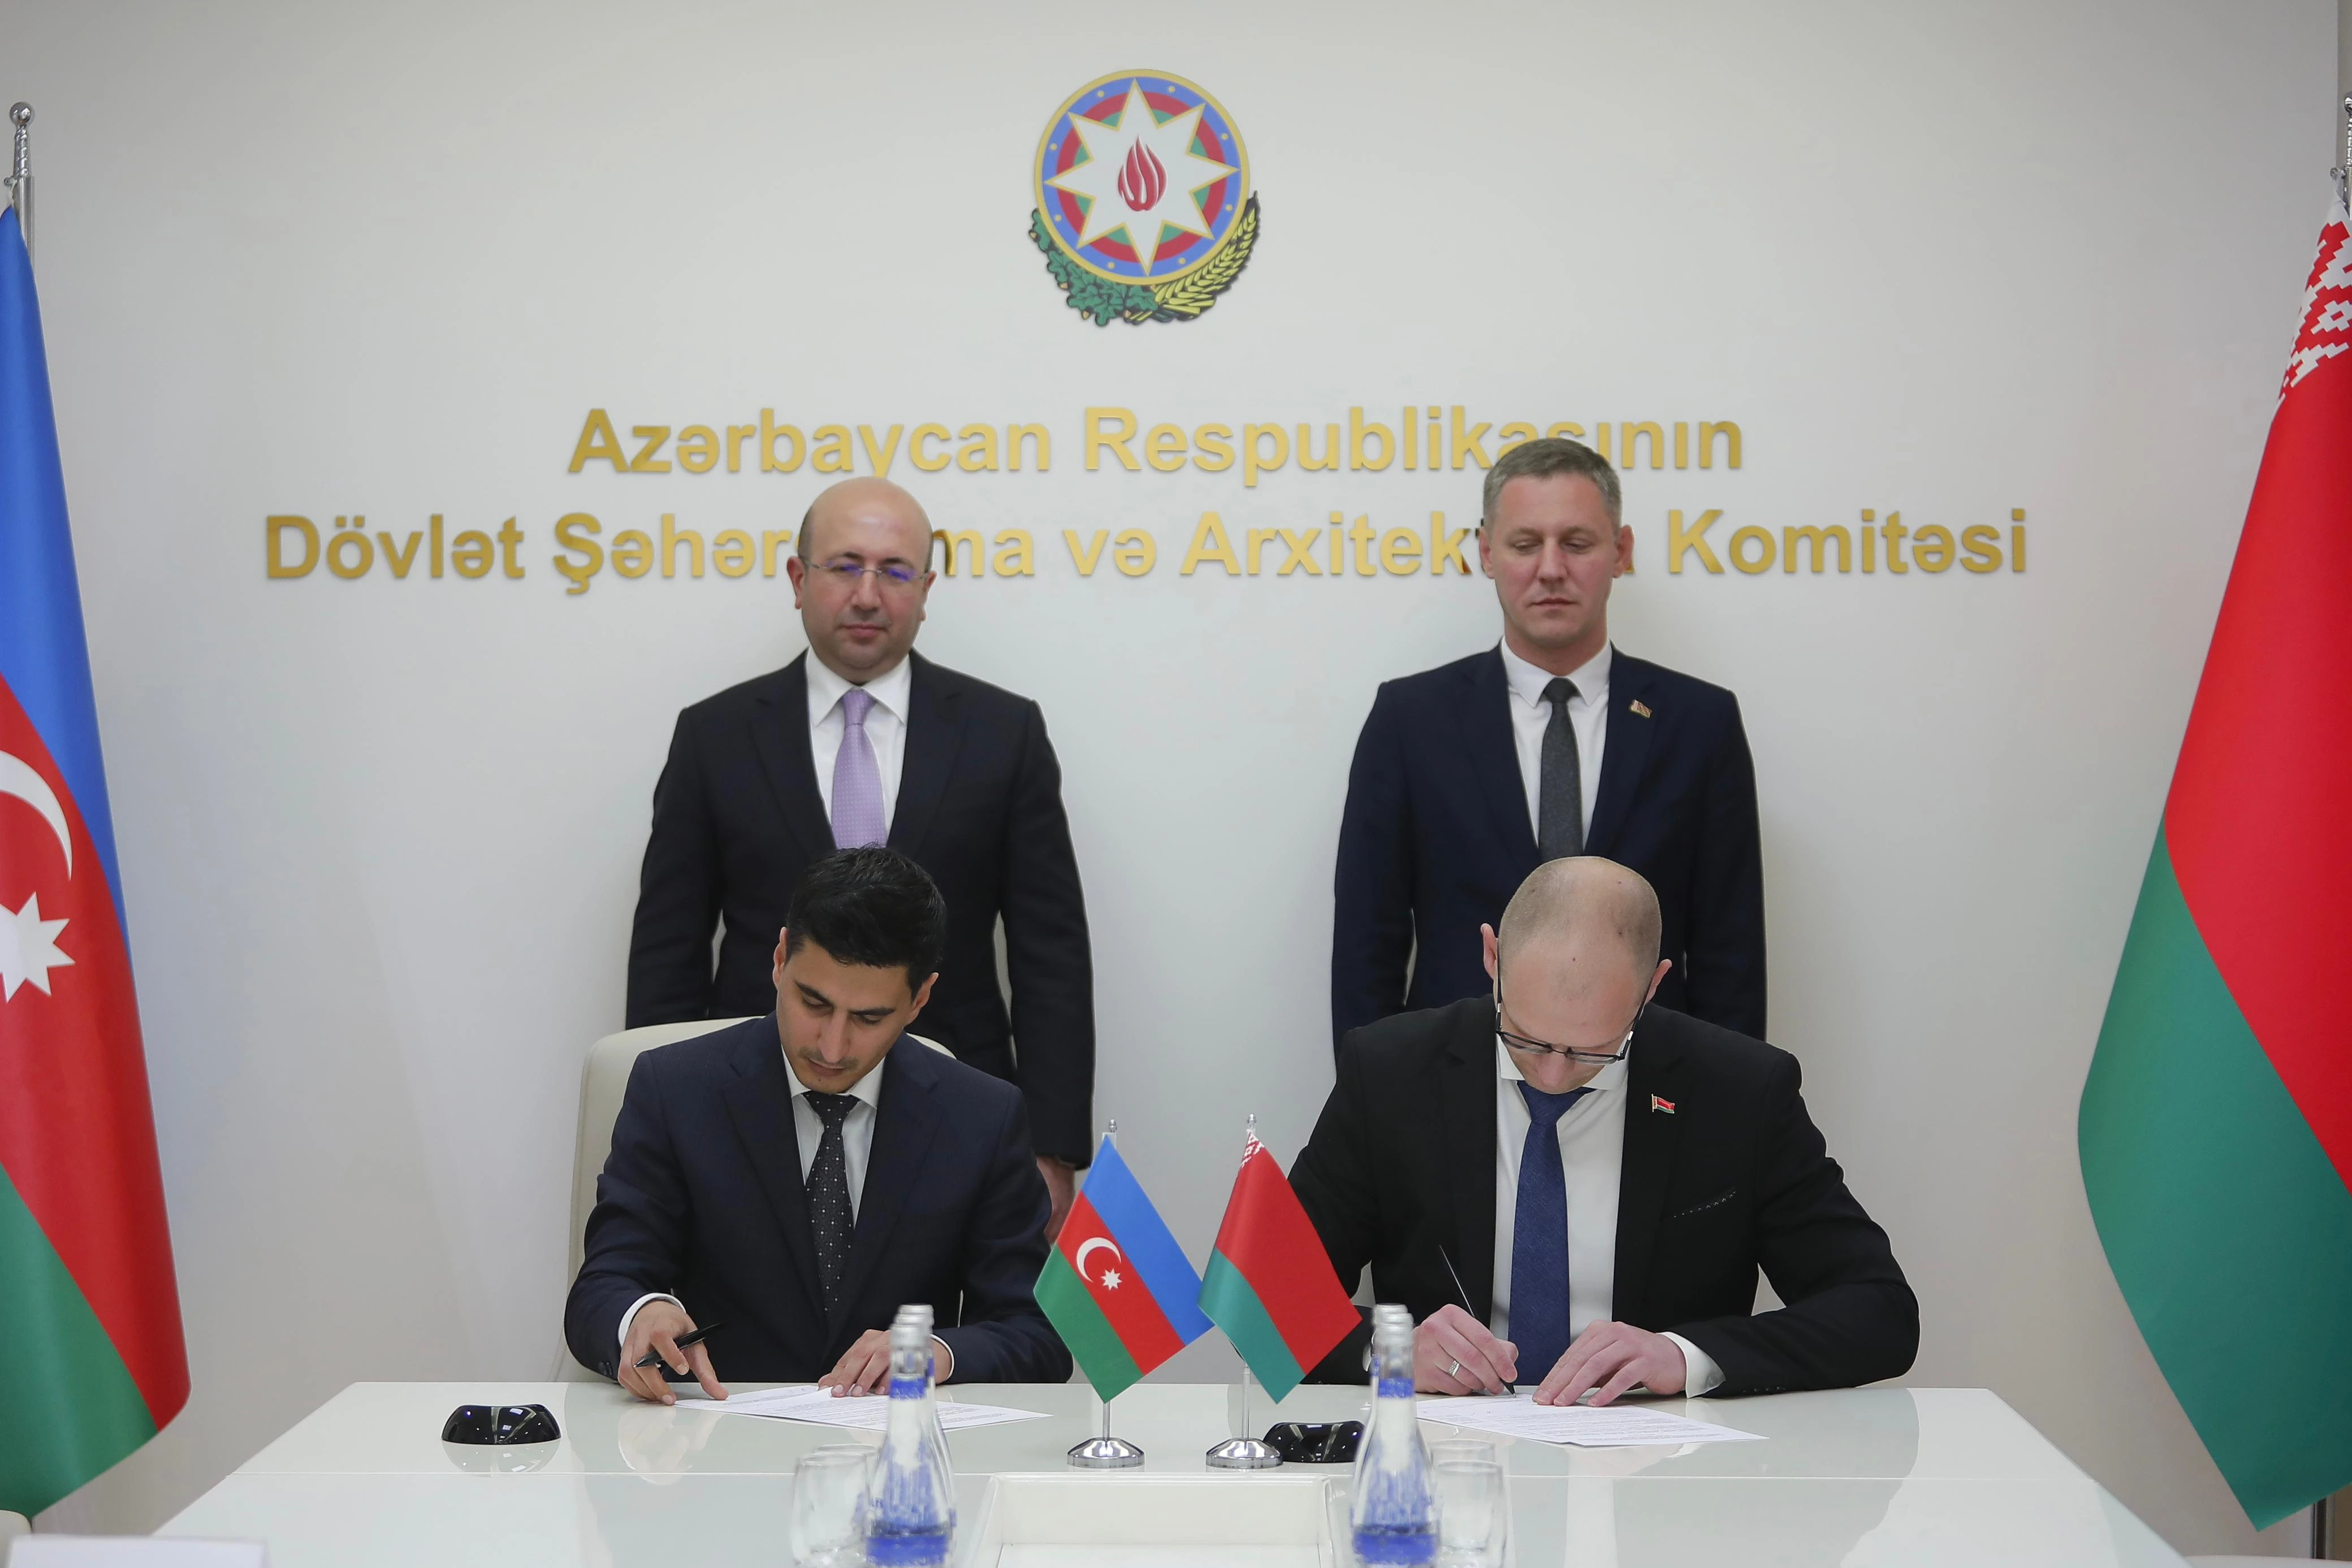 The next stage of cooperation in the field of urban planning and architecture between Azerbaijan and Belarus